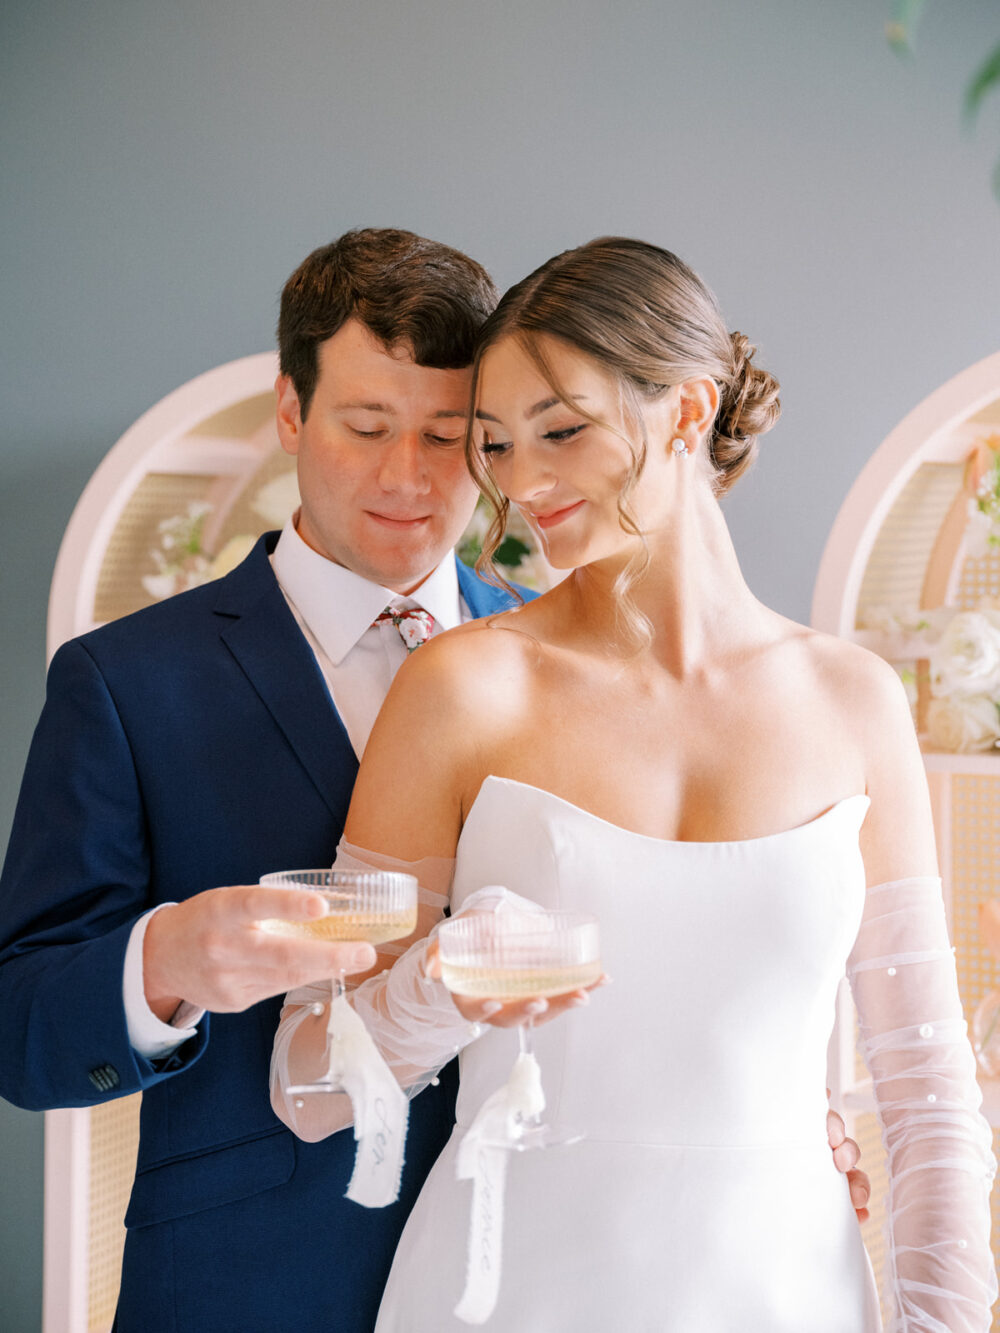 Bride and groom sharing a toast during their Orlando wedding photographed by Juliana Kae